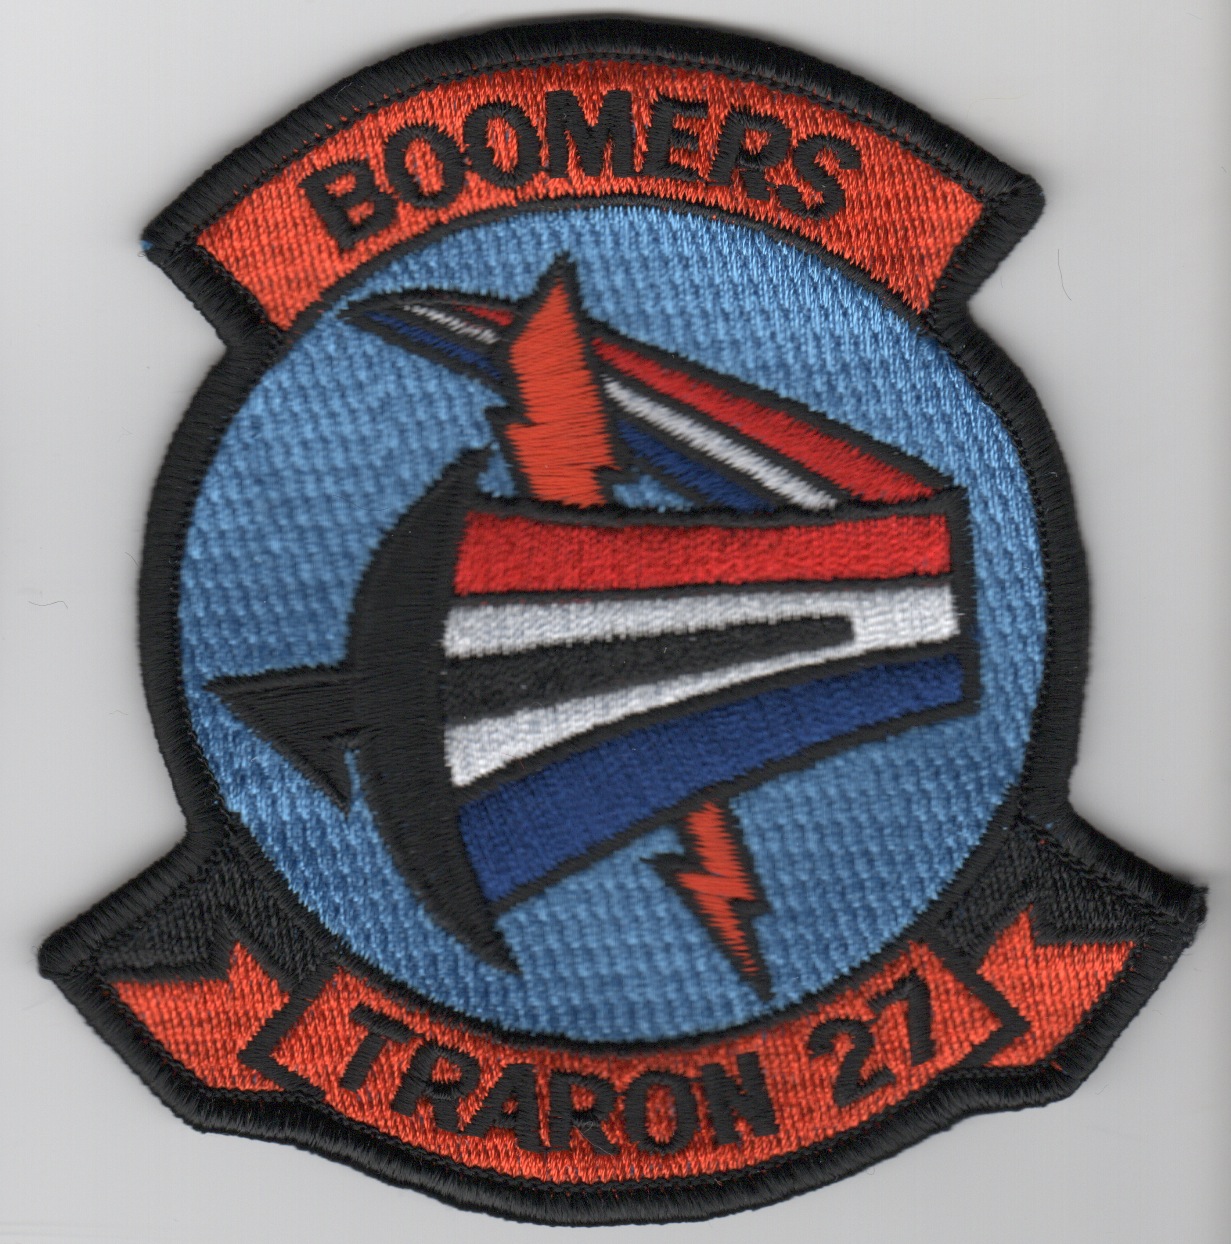 VT-27 'BOOMERS' Squadron Patch